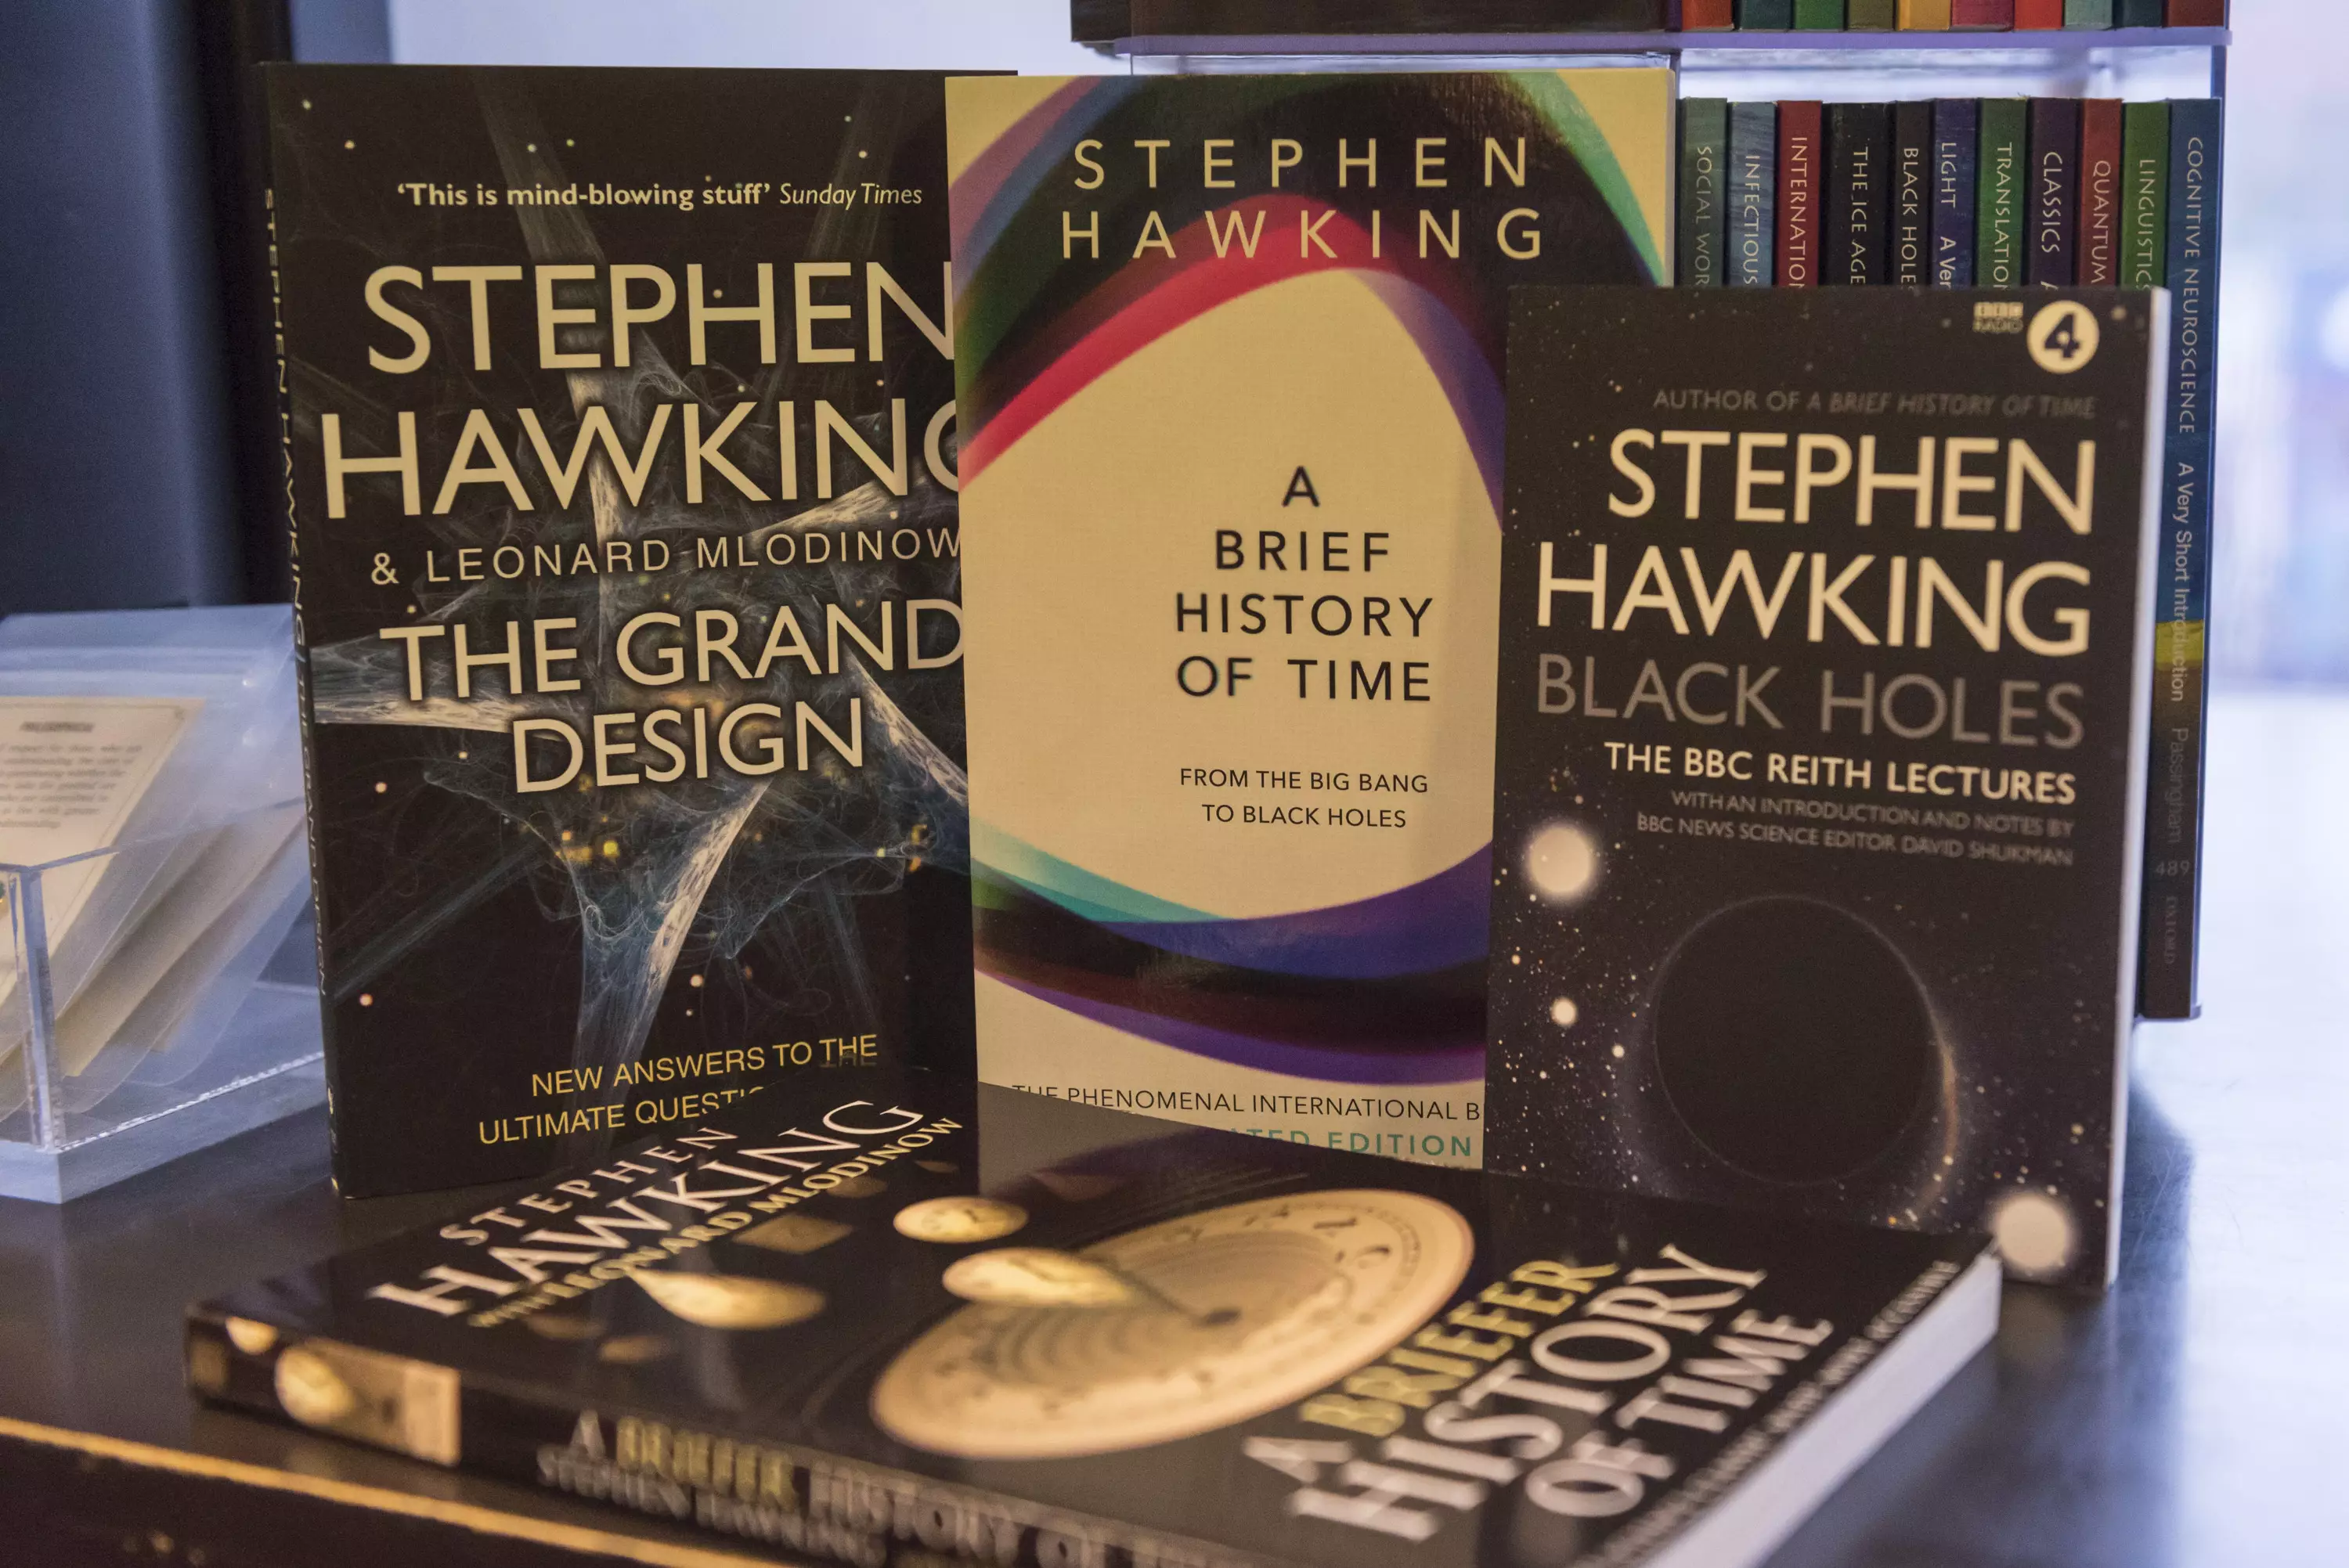 Hawking wrote many books during his long scientific career.